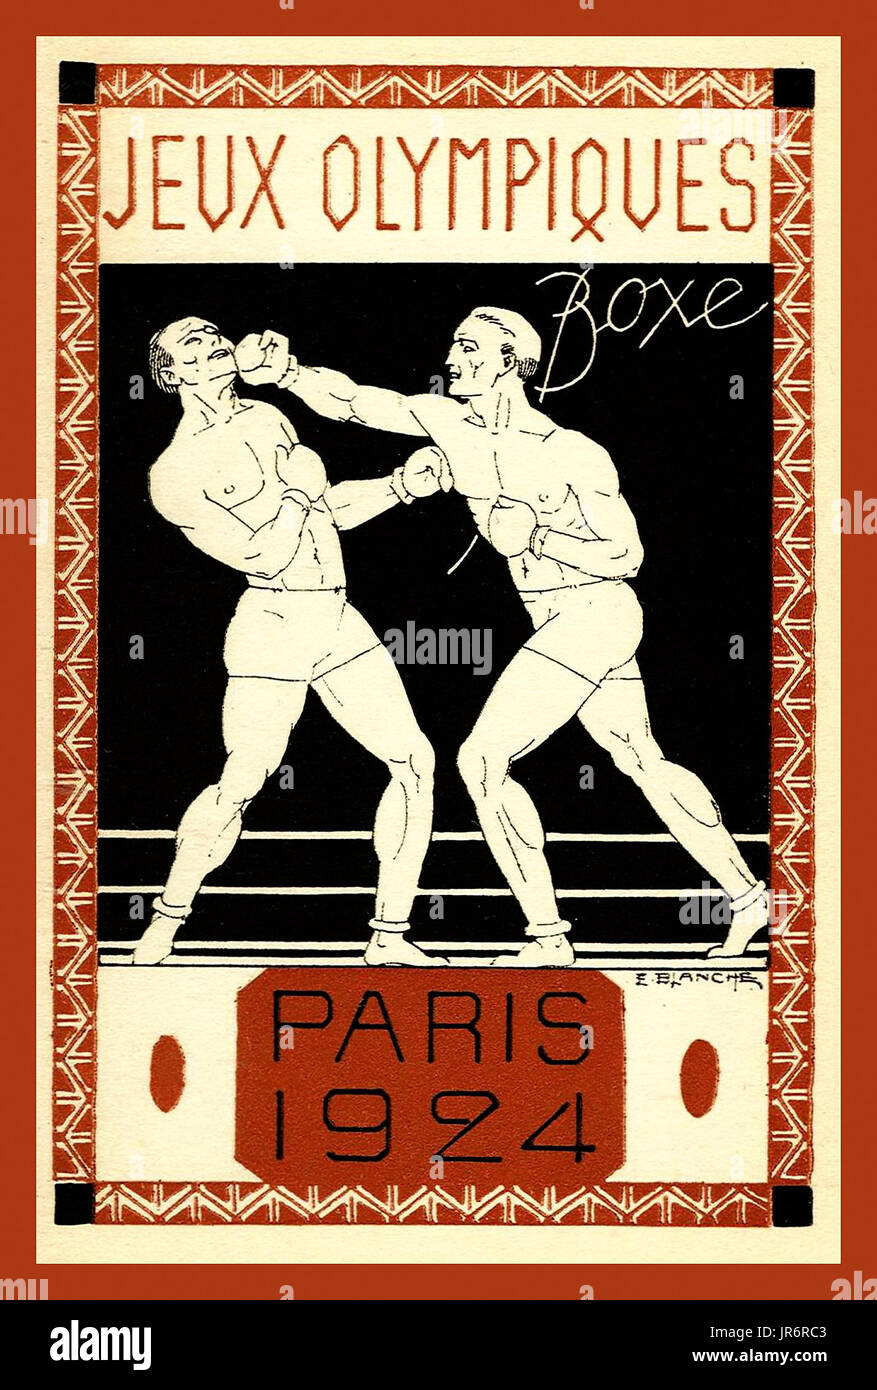 1924 Olympic Games Vintage Poster Paris France featuring Boxing ‘Jeux Olympiques’ “boxe” Stock Photo